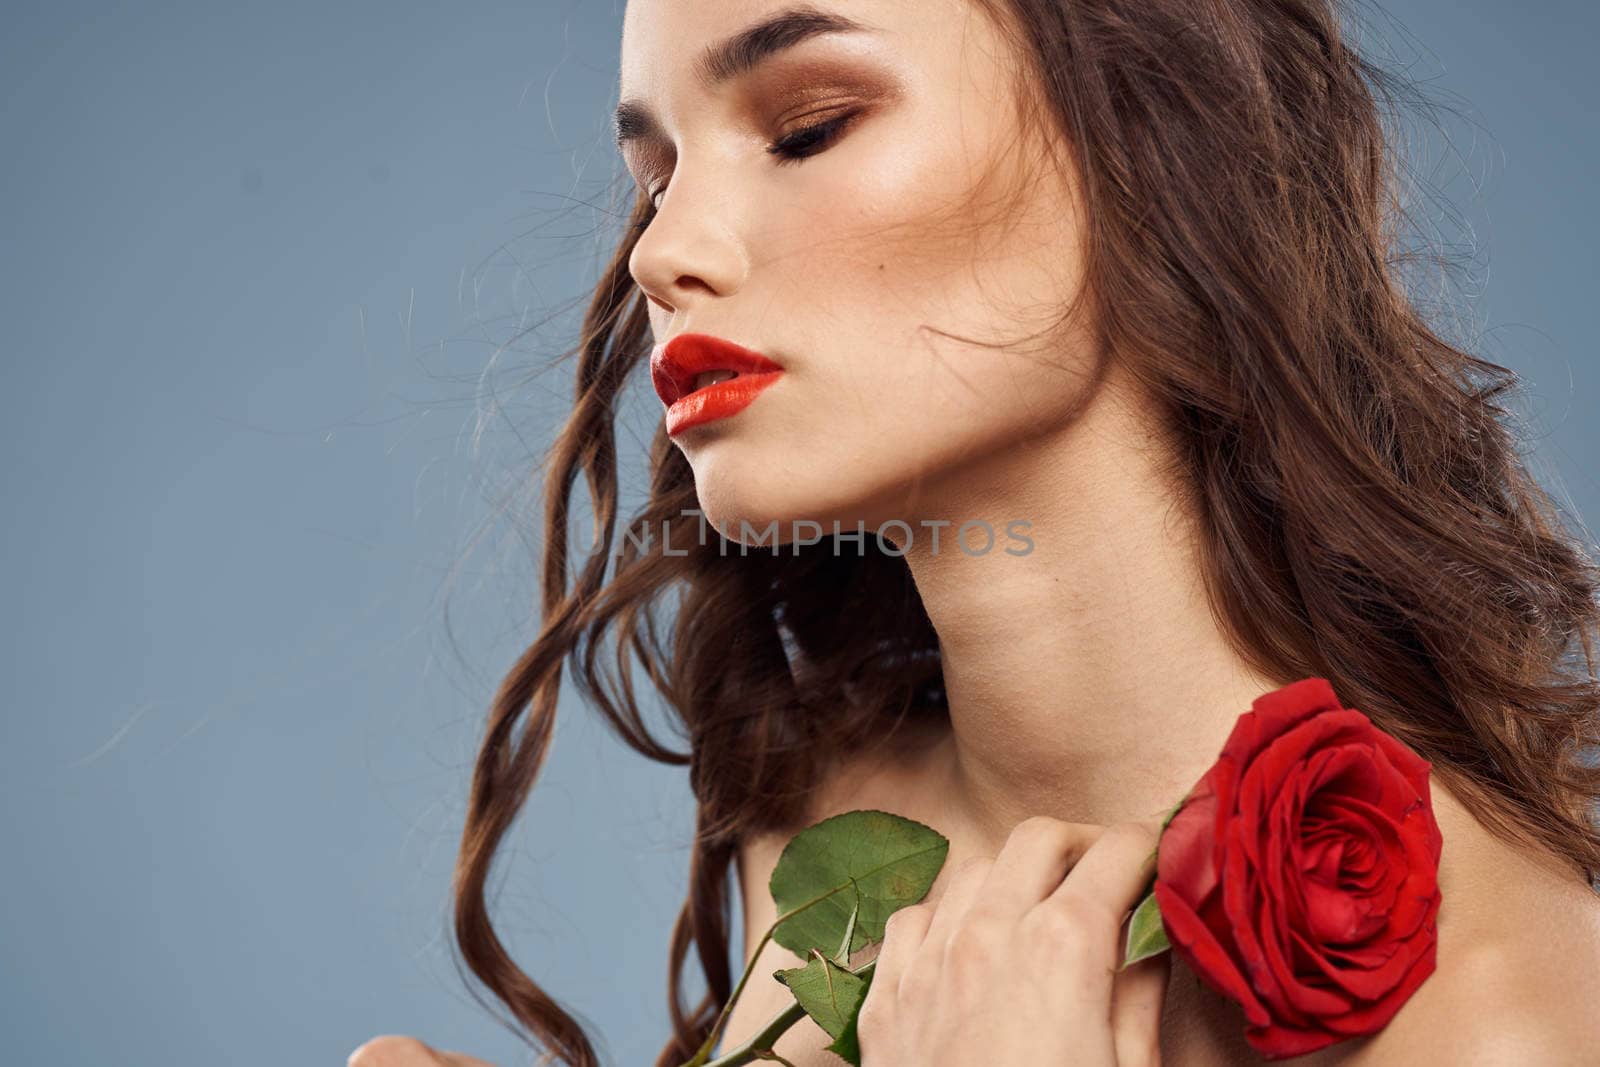 Woman portrait with red rose near the face on gray background and makeup curly hair by SHOTPRIME